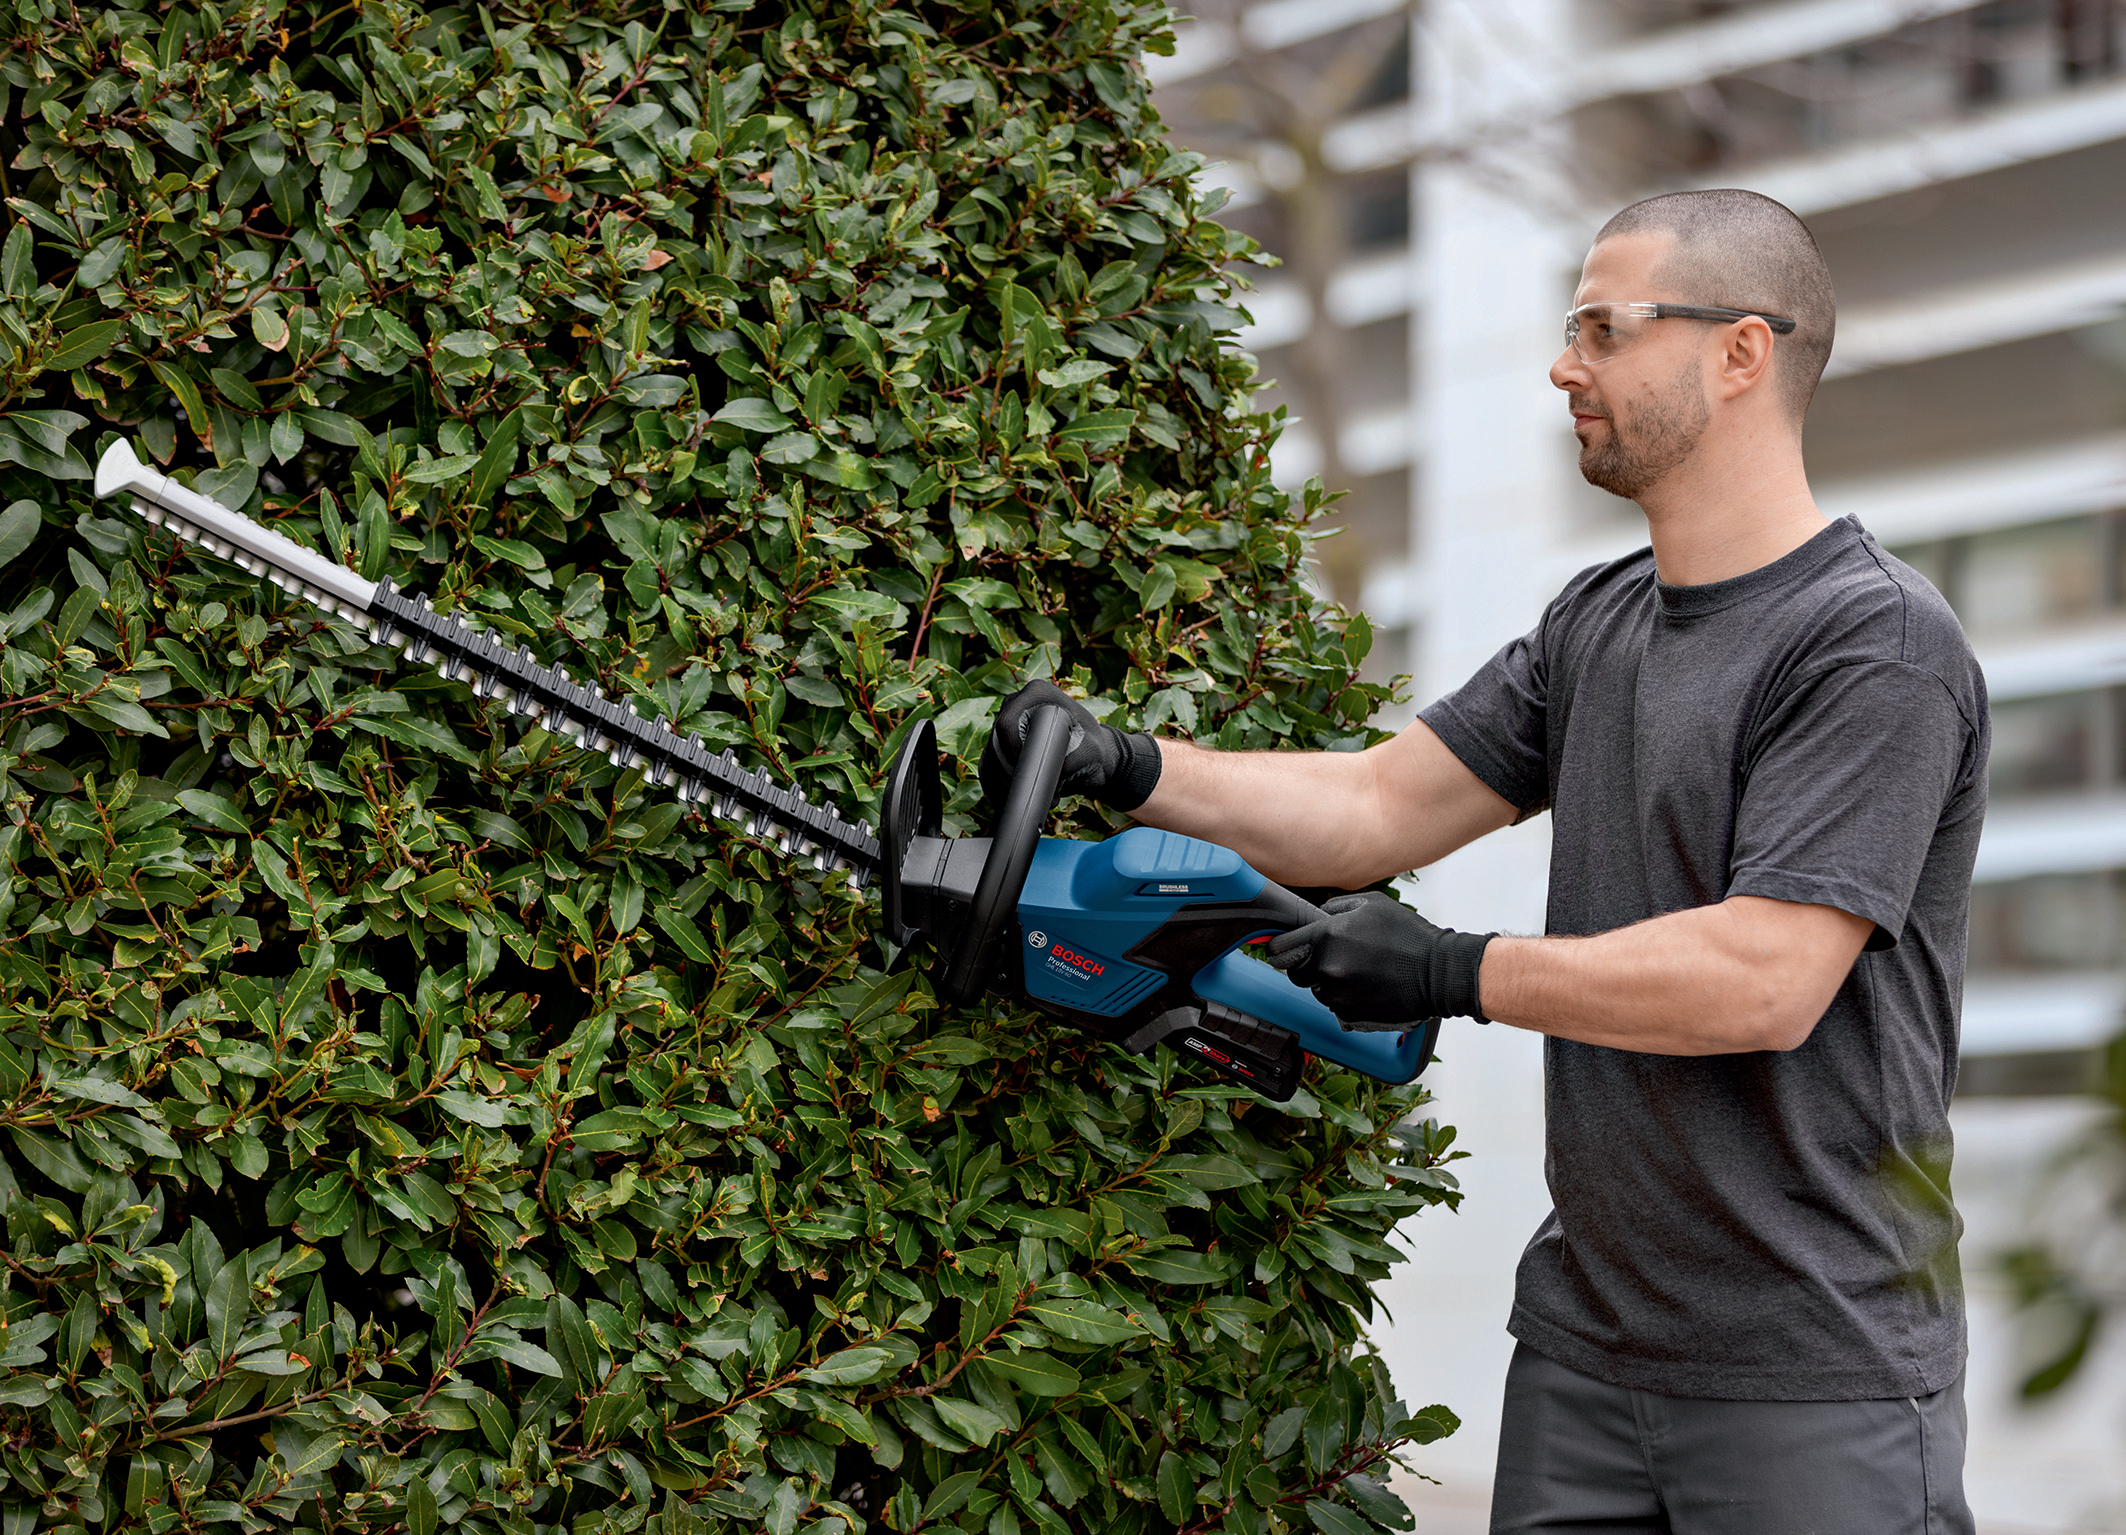 Optimized for professional use: GHE 18V-60 Professional hedge trimmer from Bosch